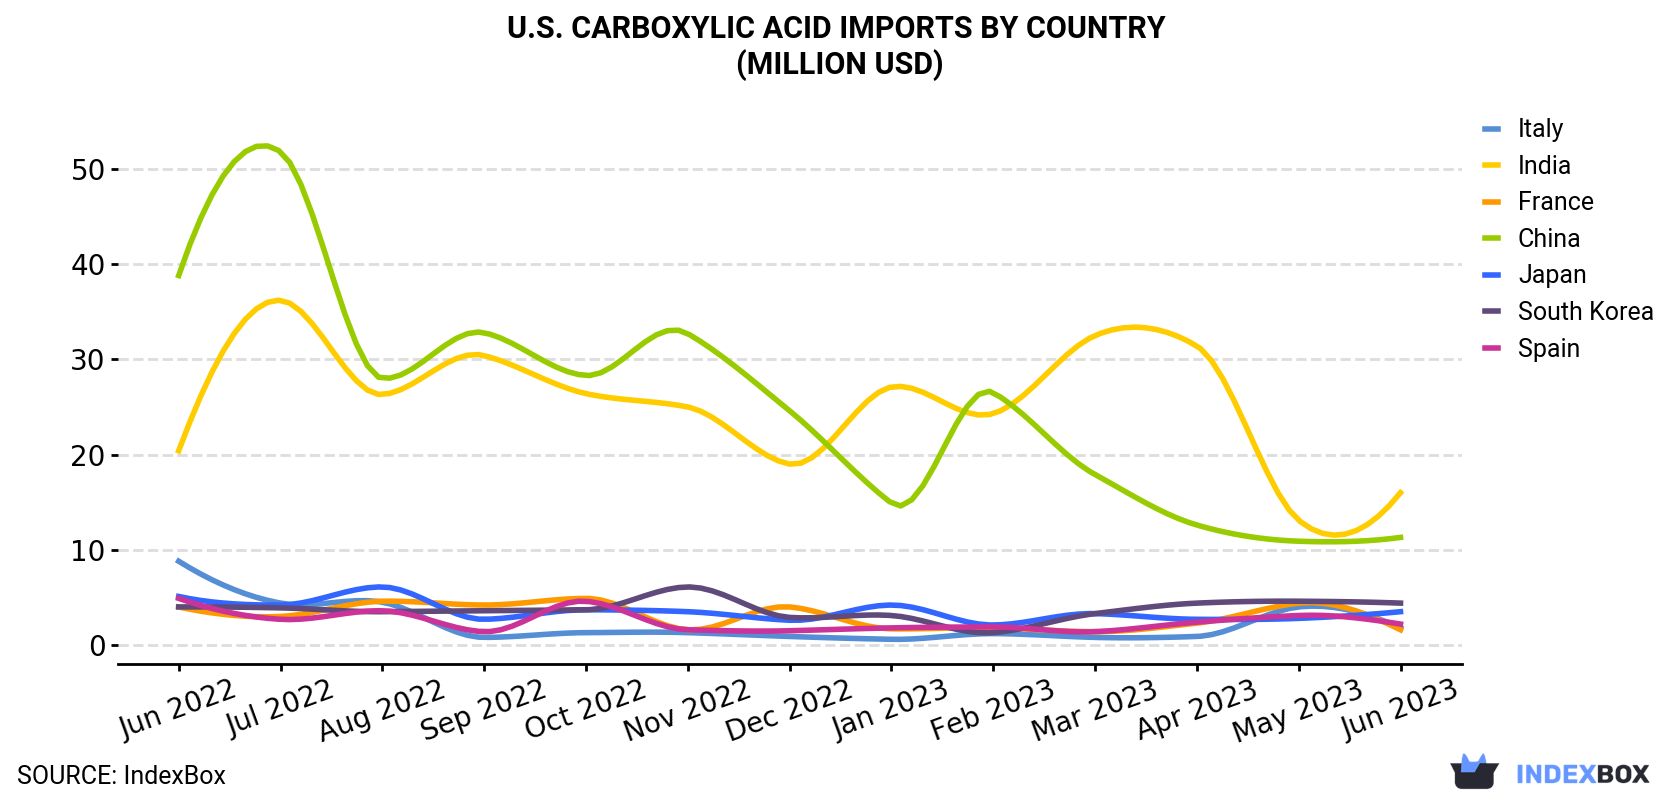 U.S. Carboxylic Acid Imports By Country (Million USD)